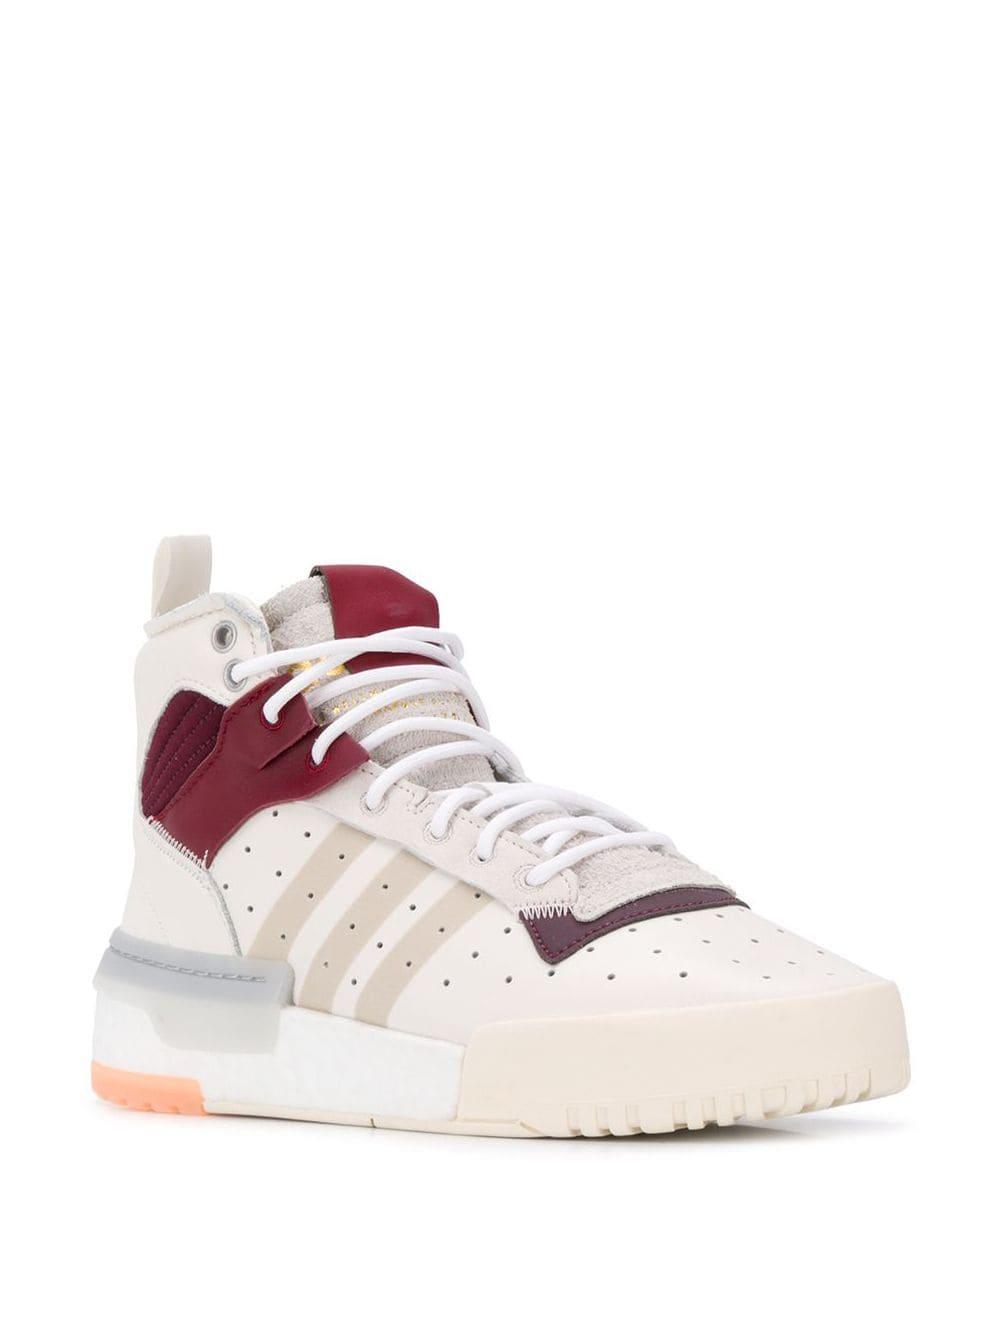 adidas Leather Rivalry Rm Sneakers in White for Men - Lyst